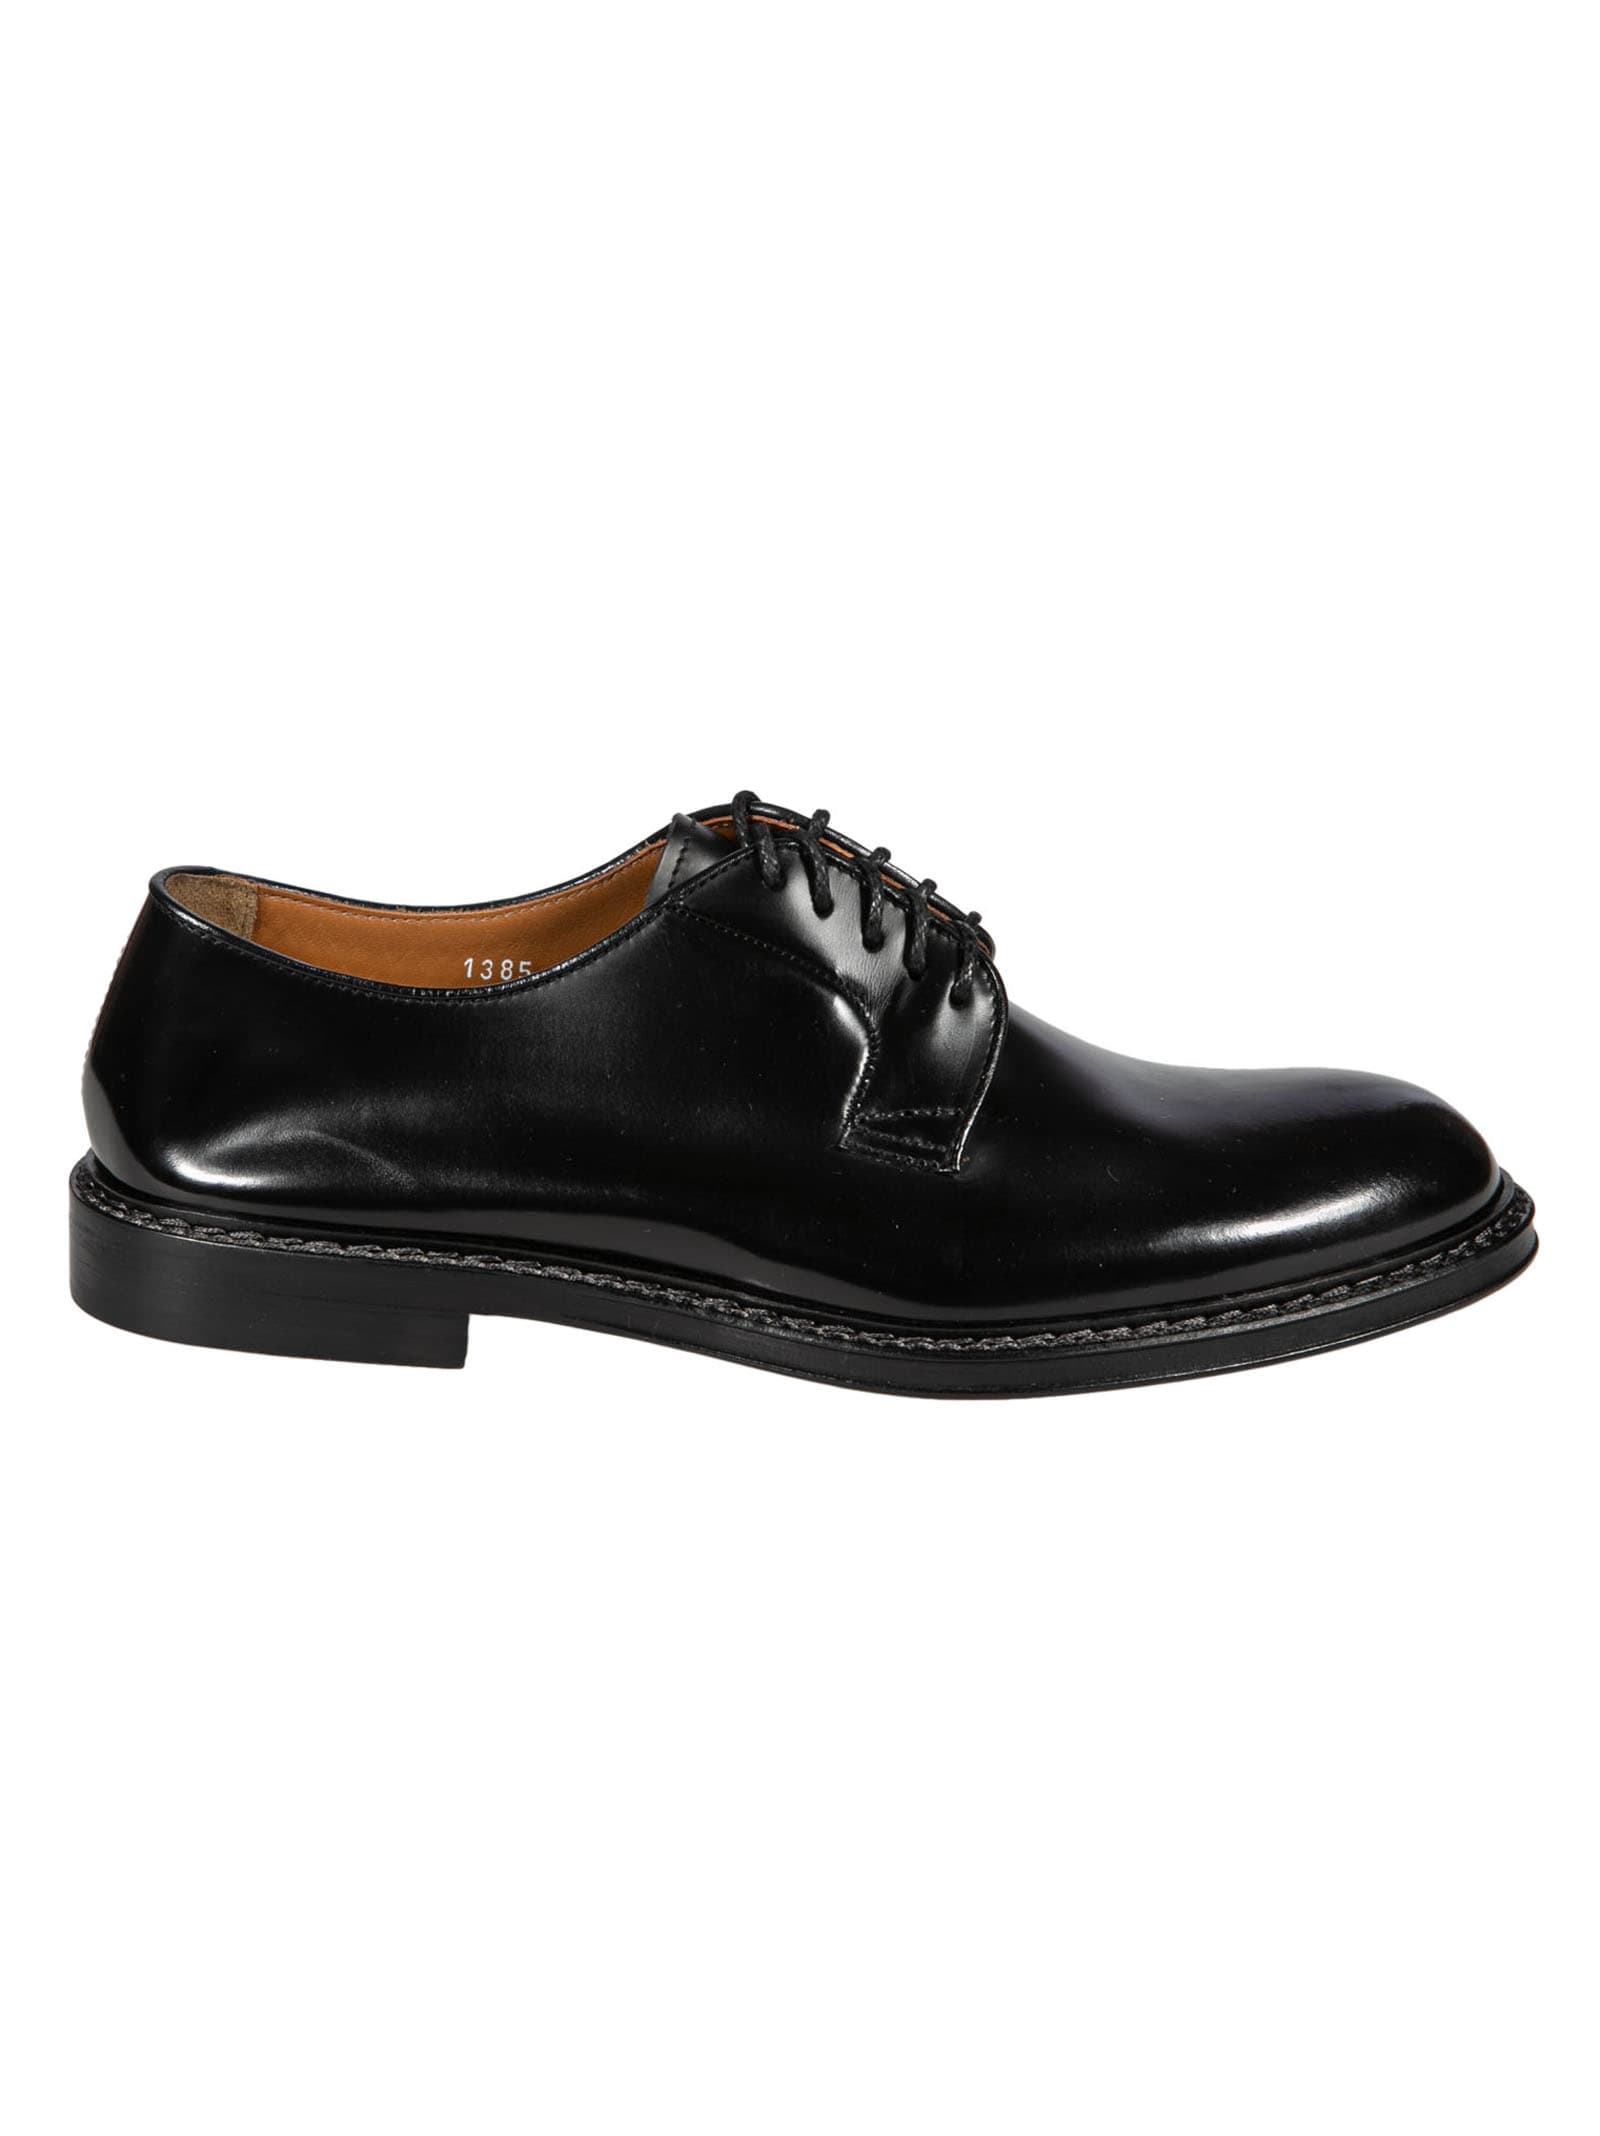 Doucals Round Toe Classic Derby Shoes